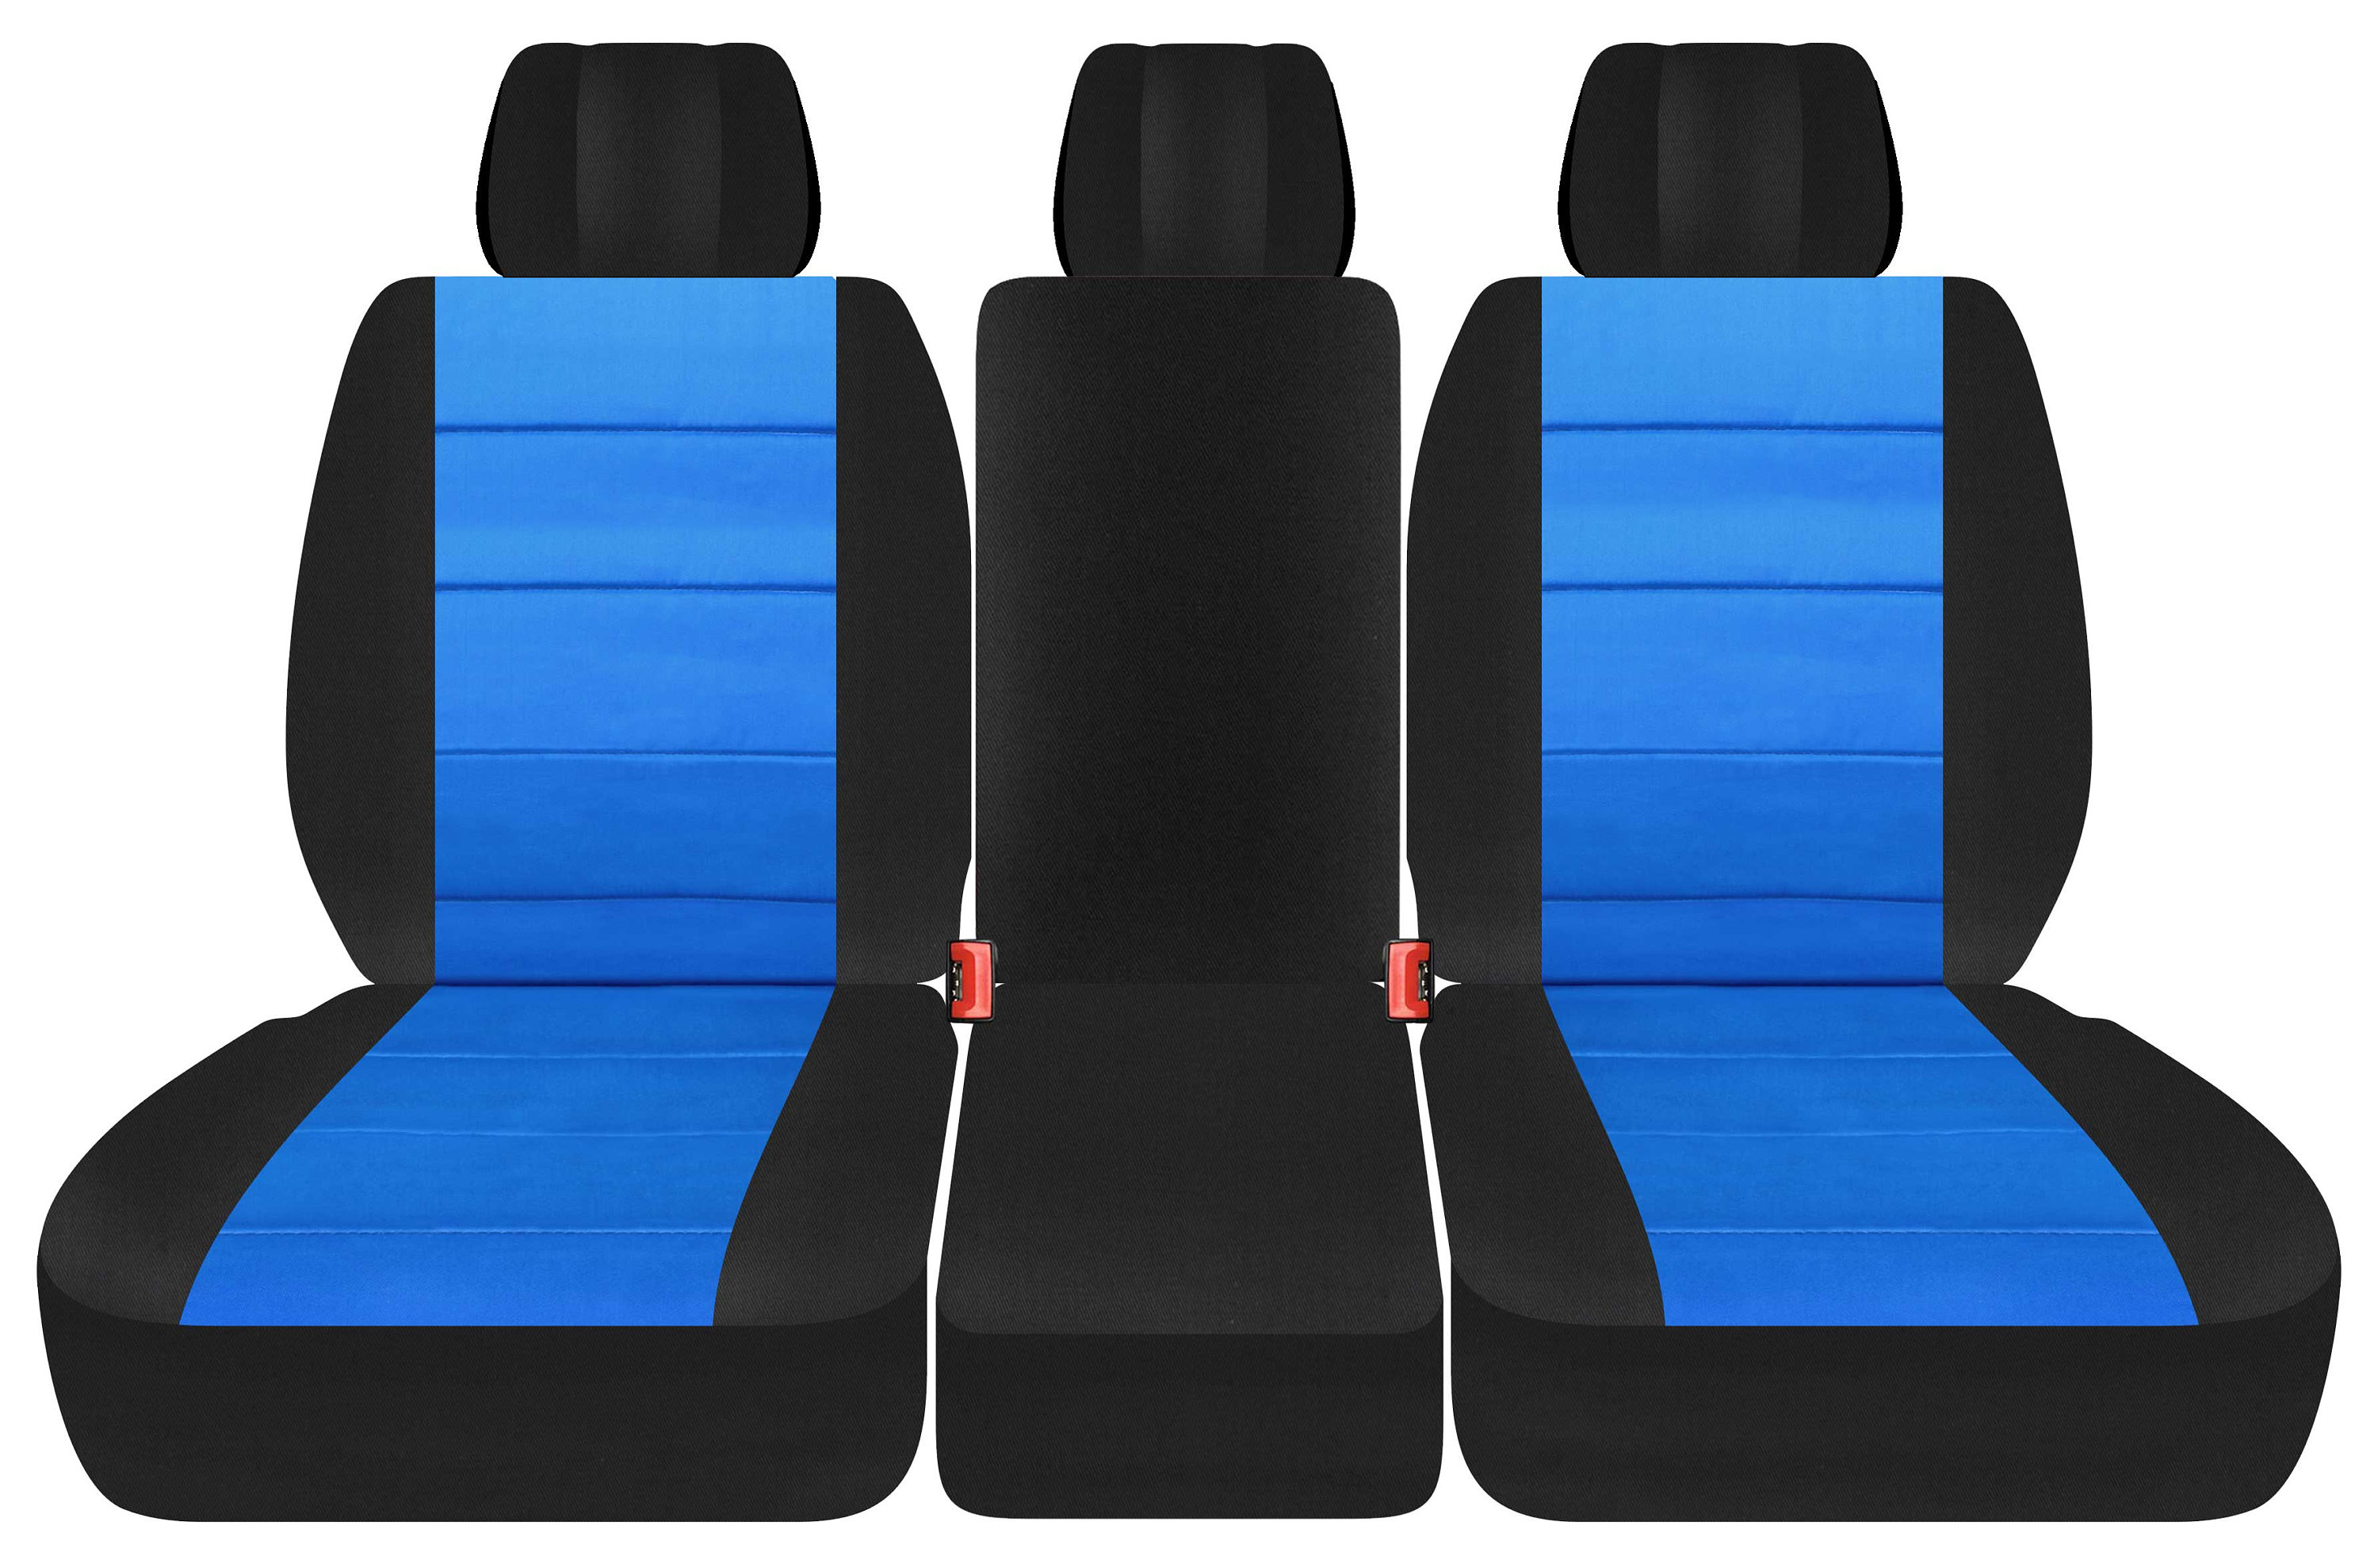 F250 Seat Covers Etsy Norway